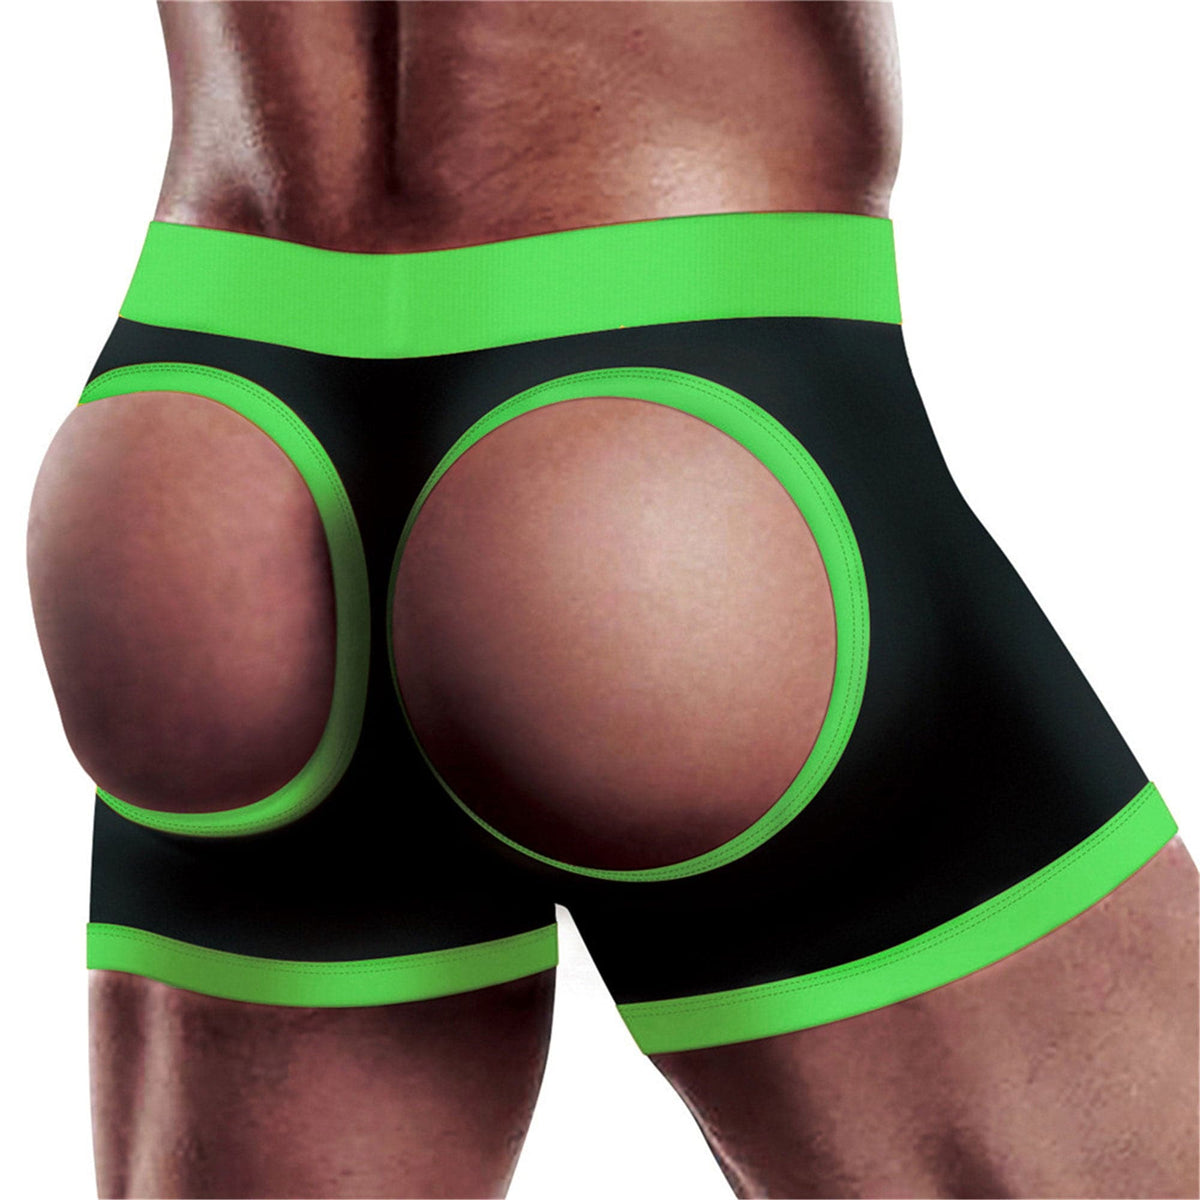 get lucky strap on boxer shorts xsmall small green black